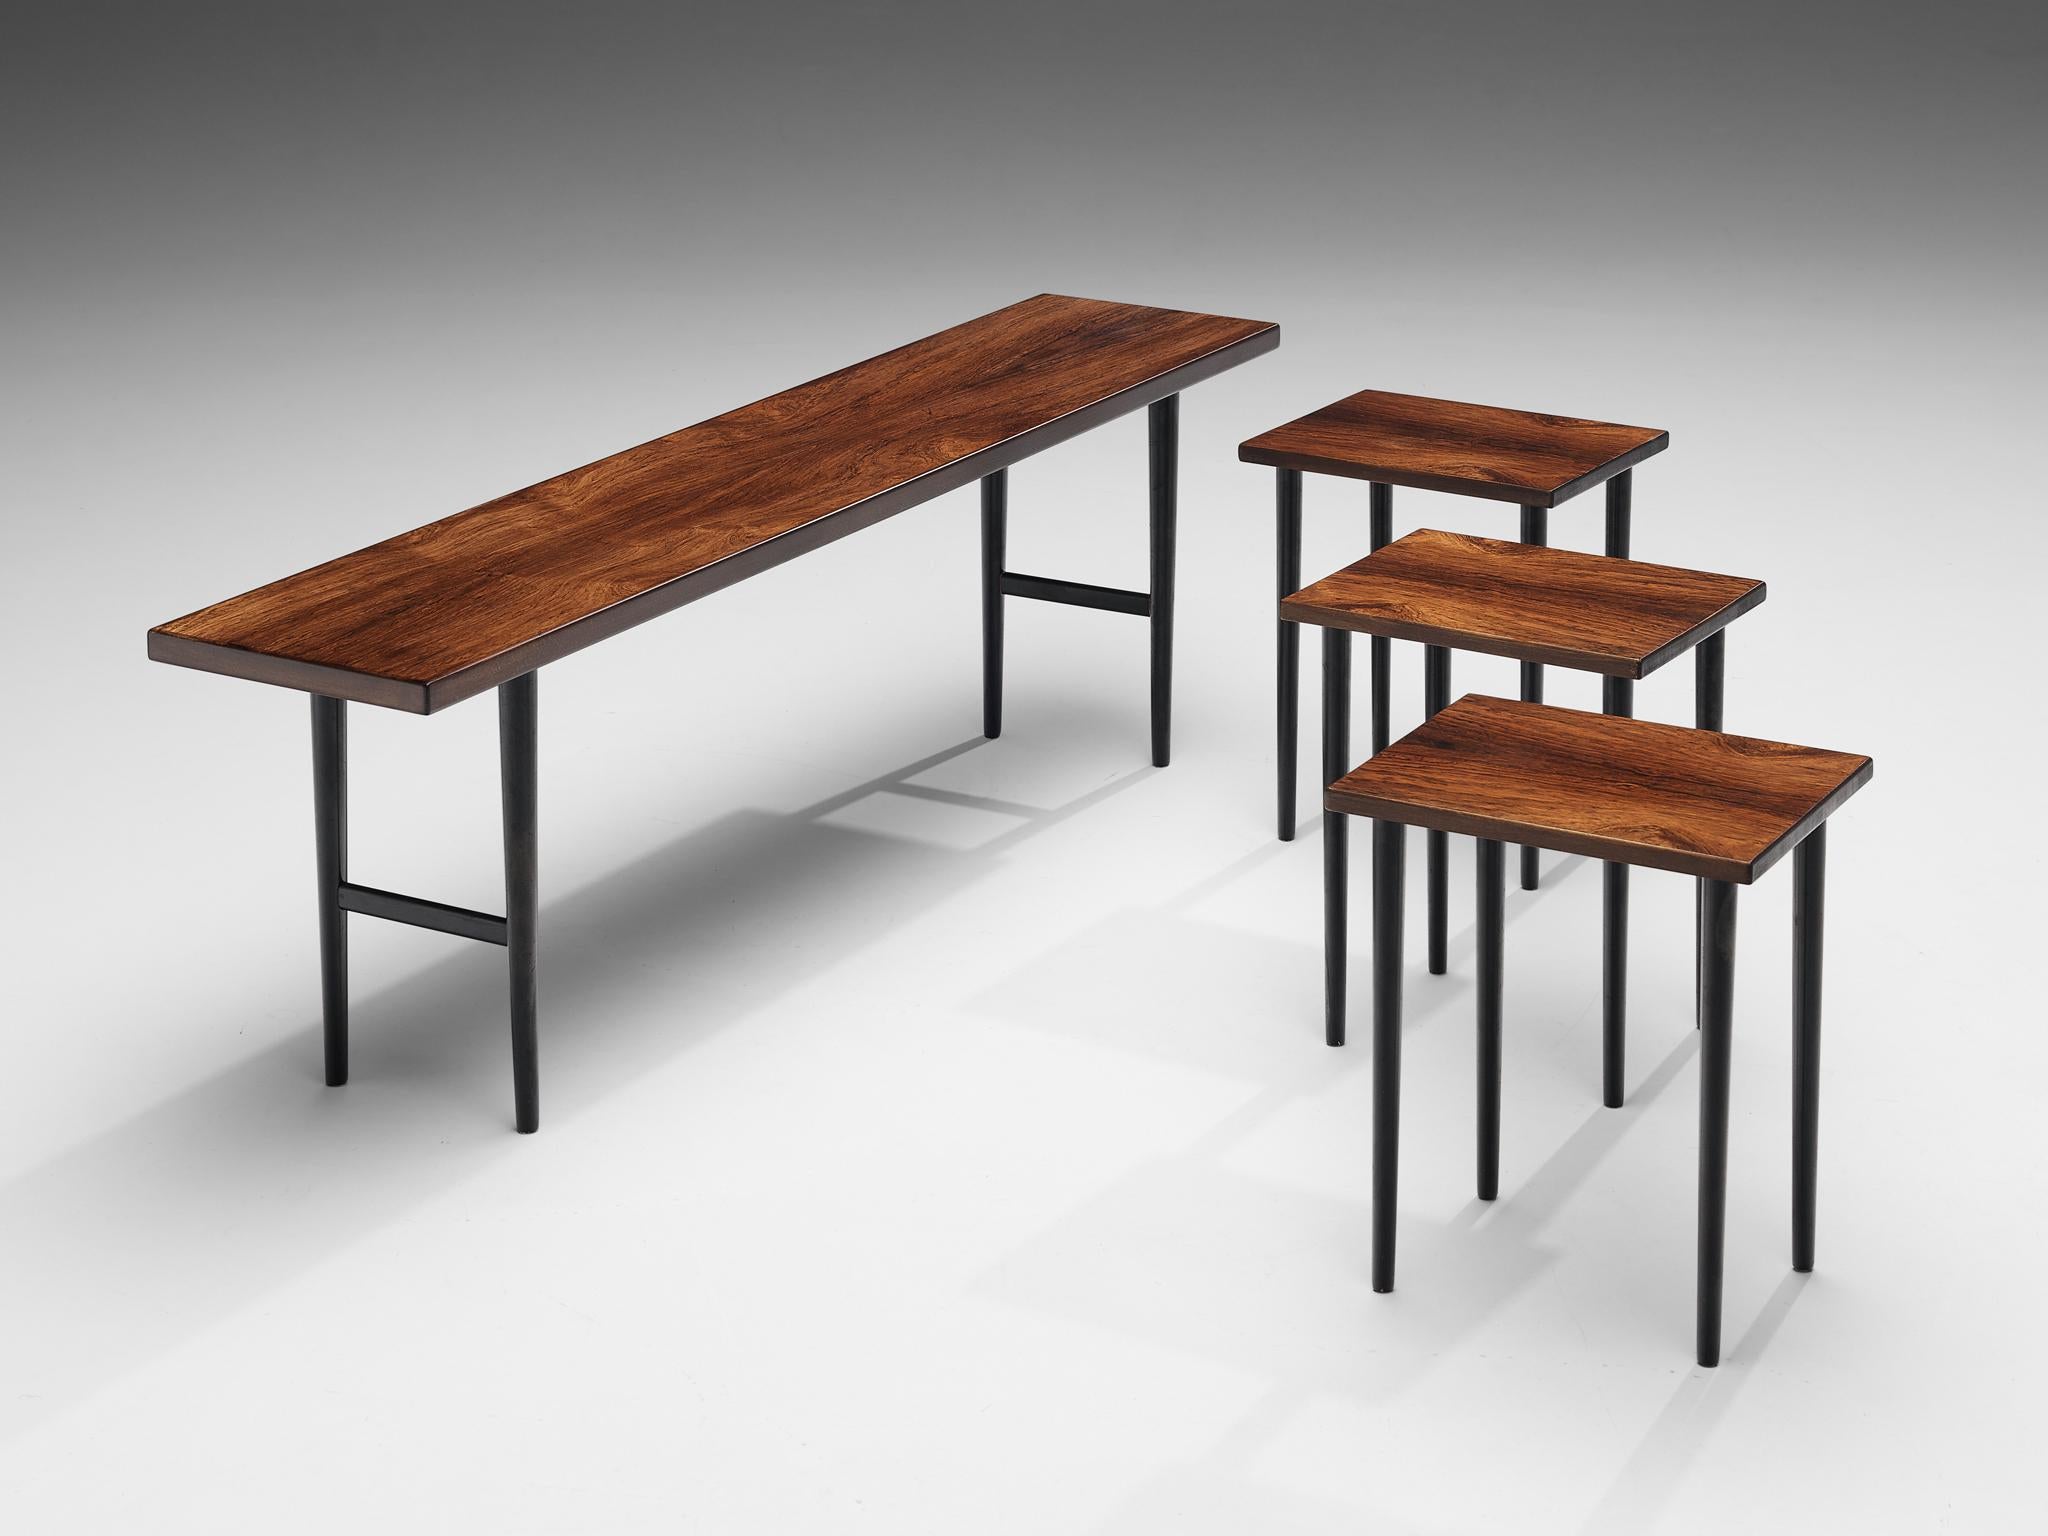 Kurt Østervig for Jason Møbler, set of four side tables model 200, rosewood, wood, Denmark, 1956

Rare set of four nesting table by Danish designer Kurt Østervig for Jason Møbler. The model 200 was designed in 1956 with a long table under which the